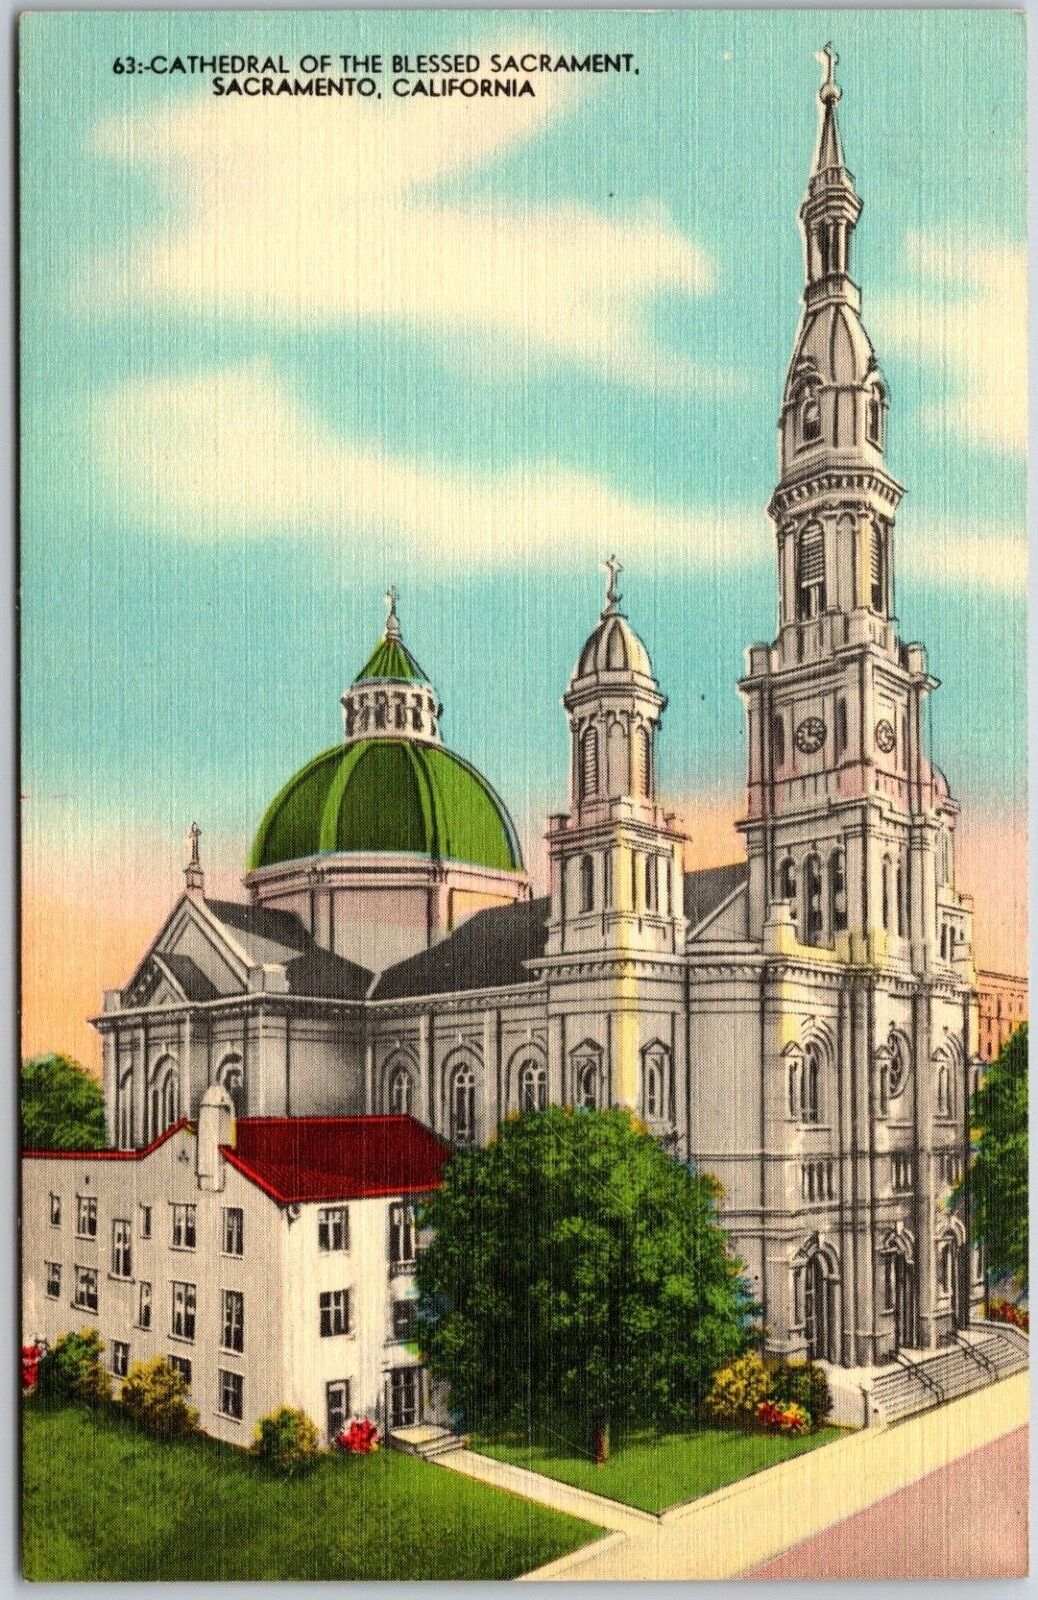 Cathedral of the Blessed Sacrament, Sacramento, California - Postcard